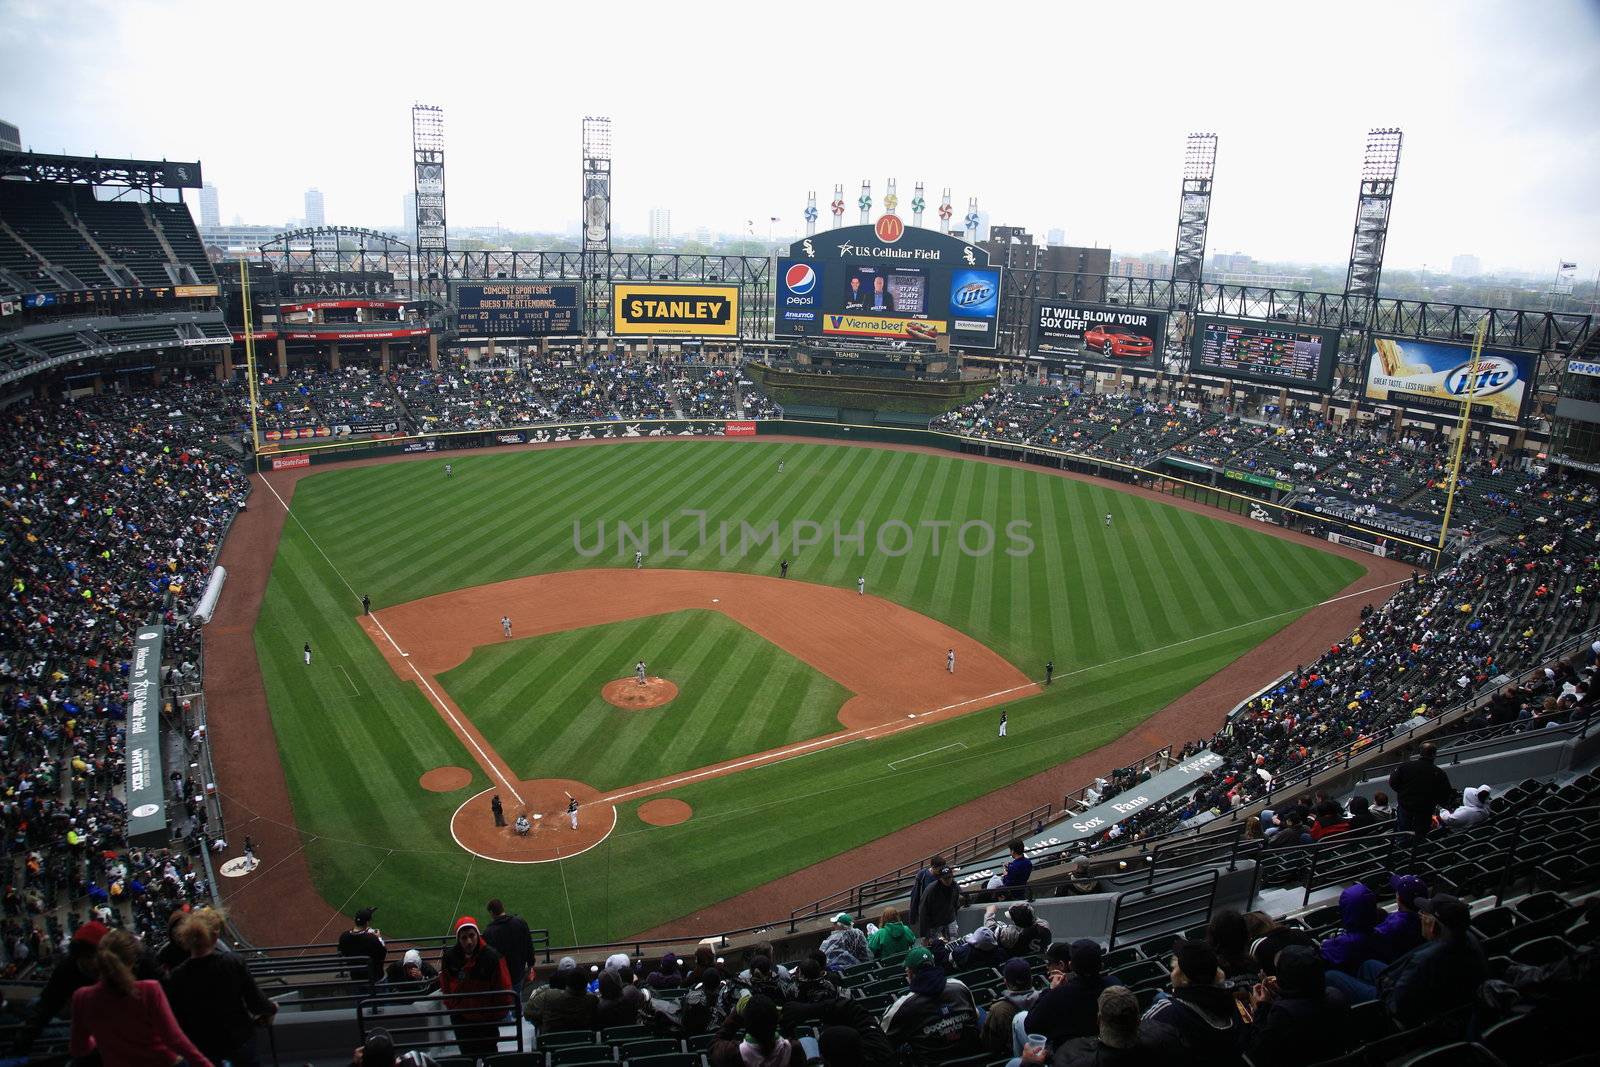 U.S. Cellular Field - Chicago White Sox by Ffooter